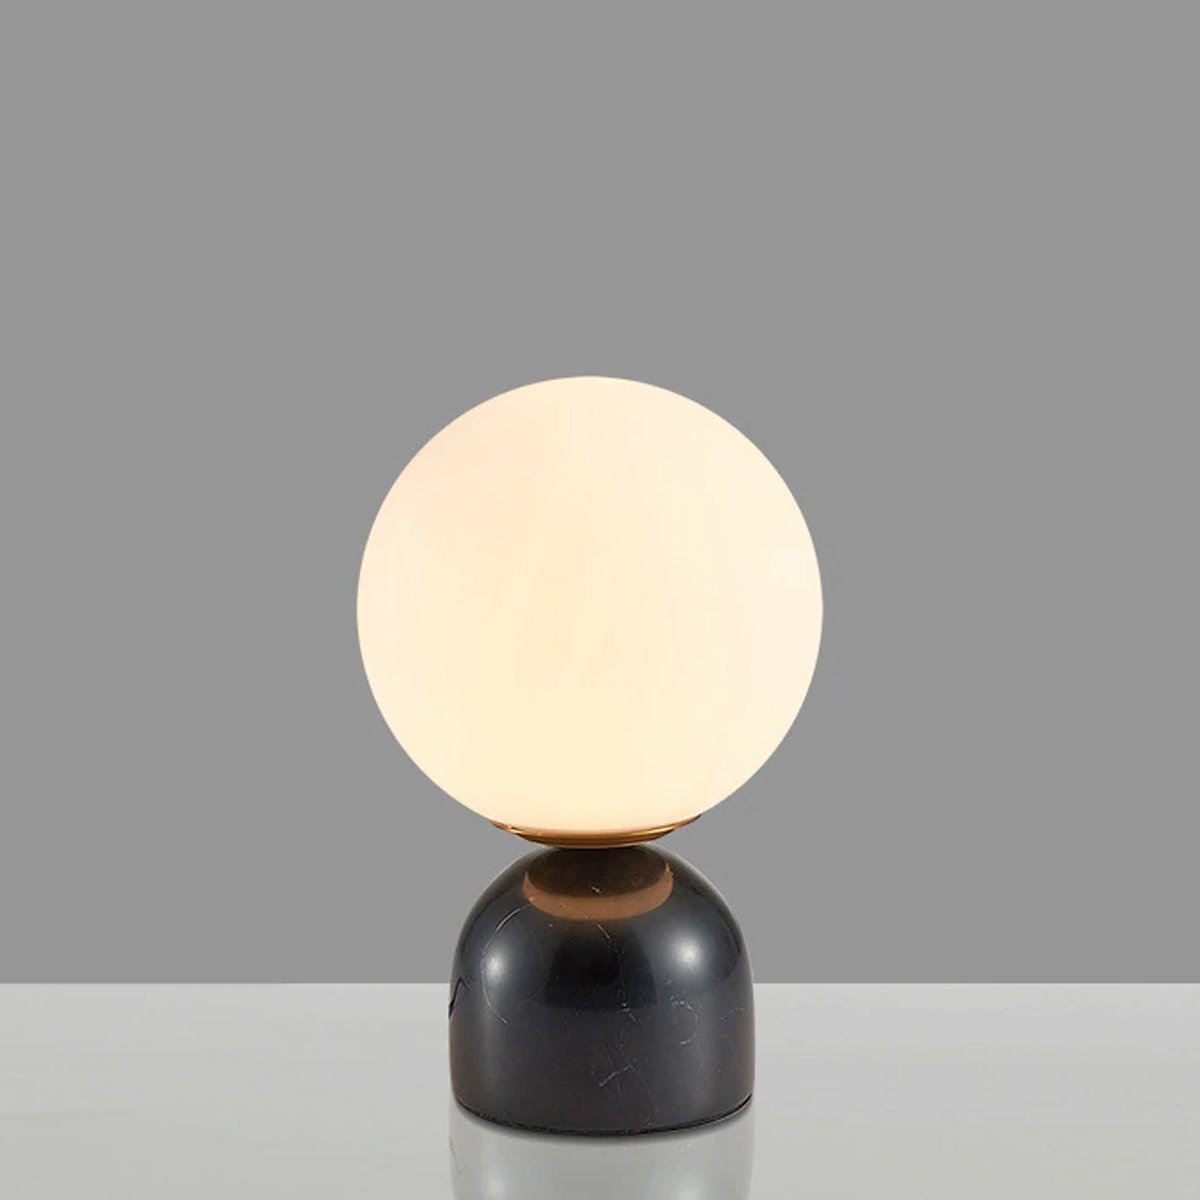 Marble Globe table light in Black or White Art Deco Black Base – Table Lamp – CGC Retail Outlet